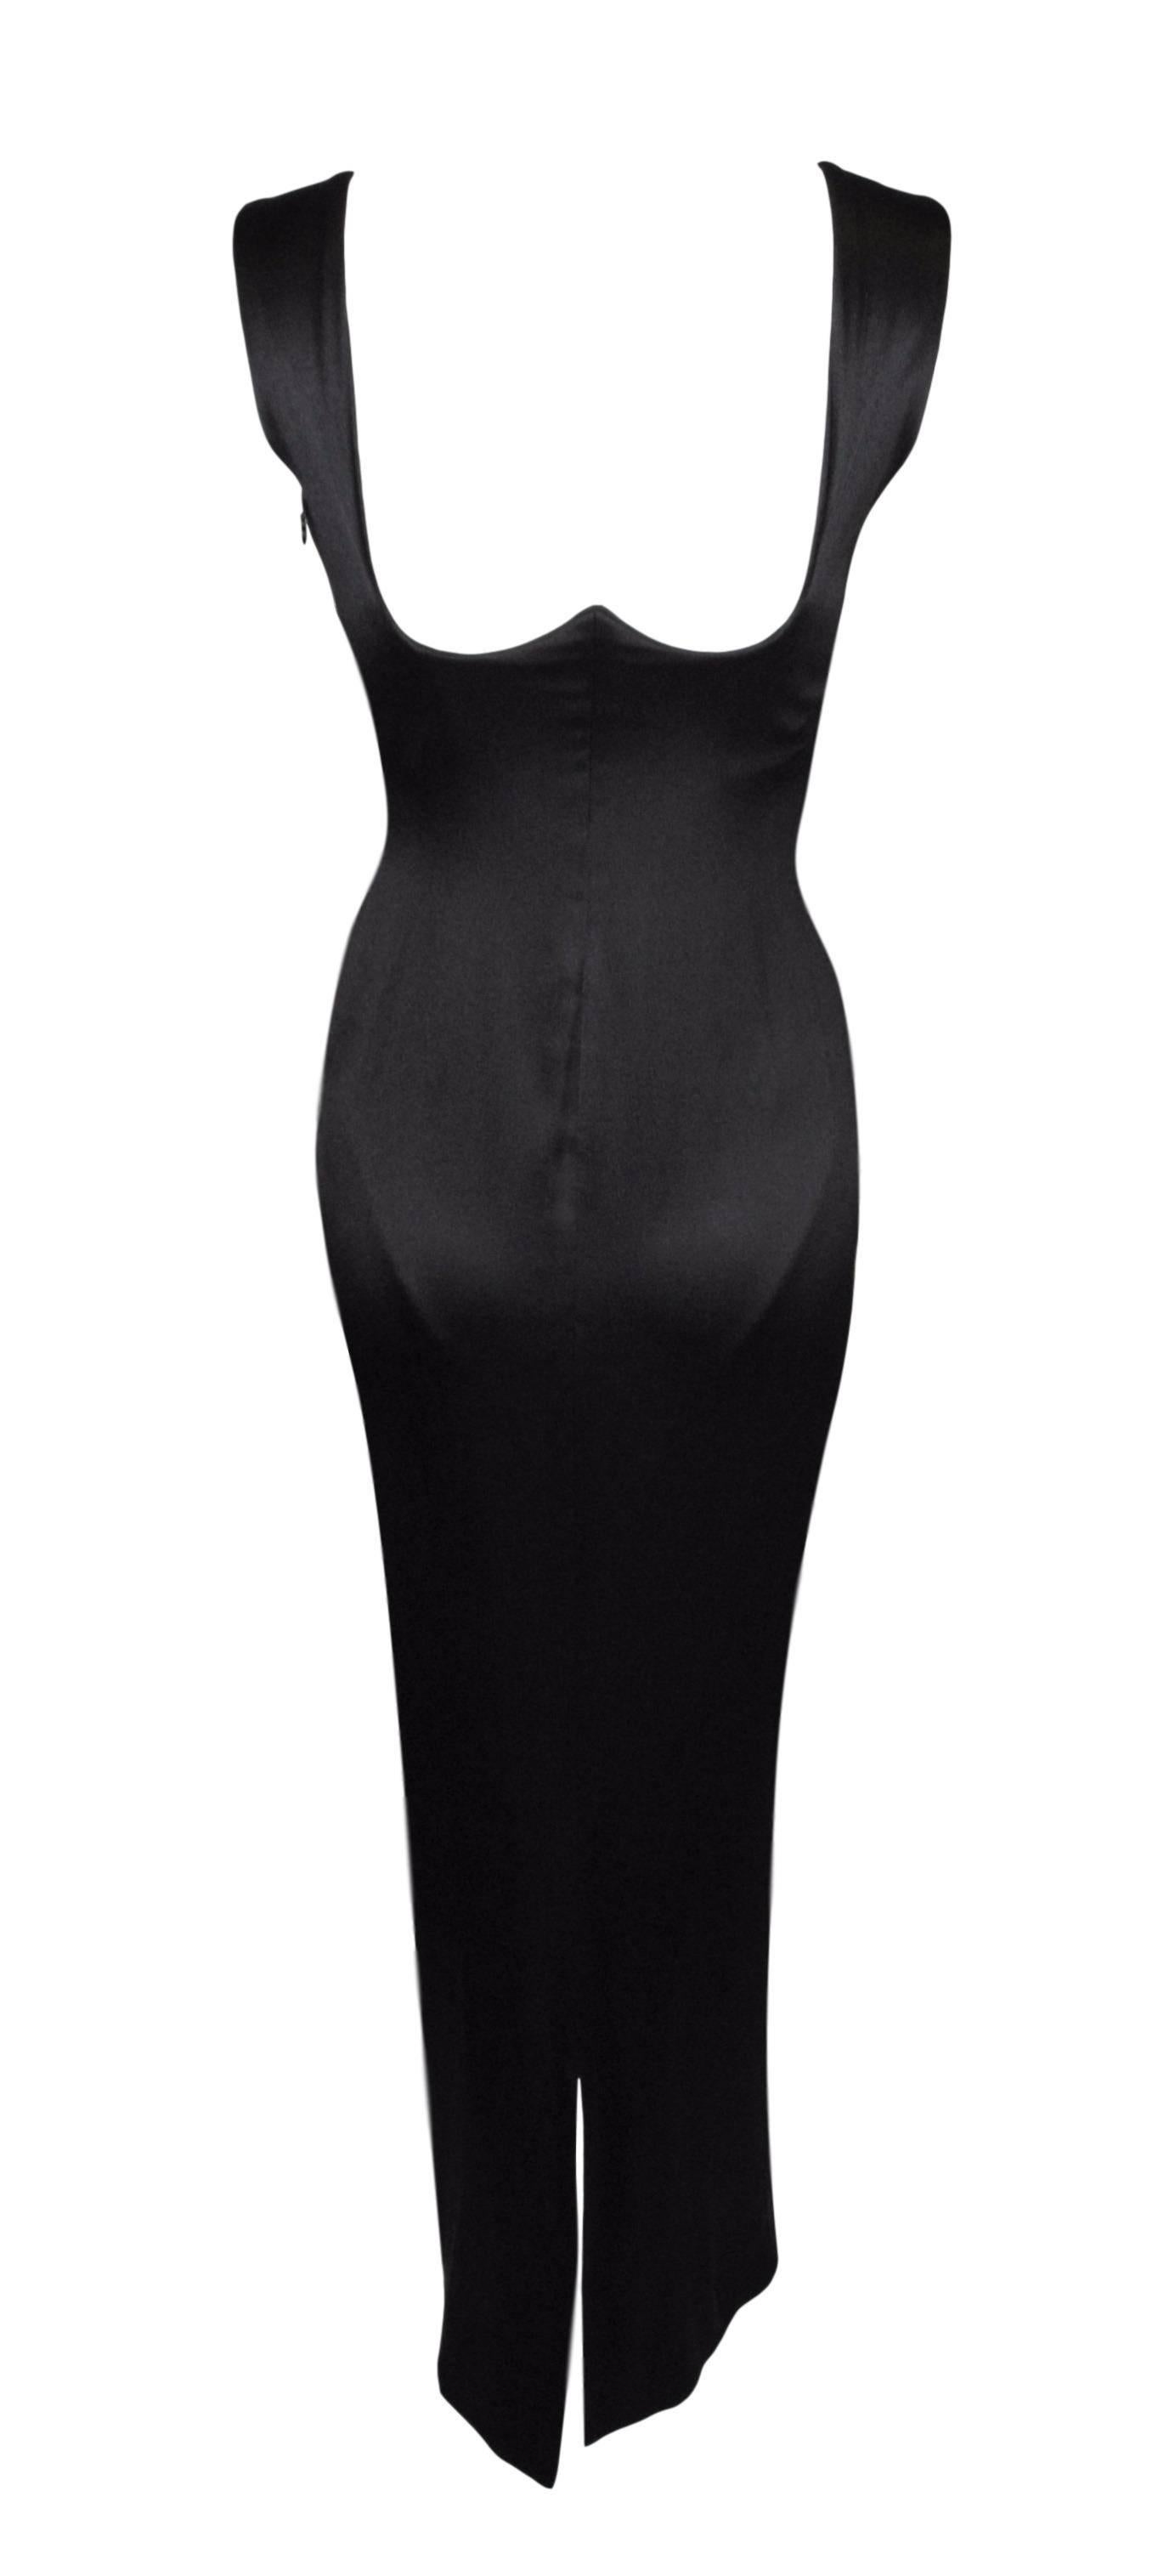 DESIGNER: F/W 1995 Gianni Versace- gown with a built in bodysuit.

Please contact for more information and/or photos.

CONDITION: Excellent- tiny mend to seam at the zipper on inside bodysuit (minor and not visible as it is on the inner bodysuit and